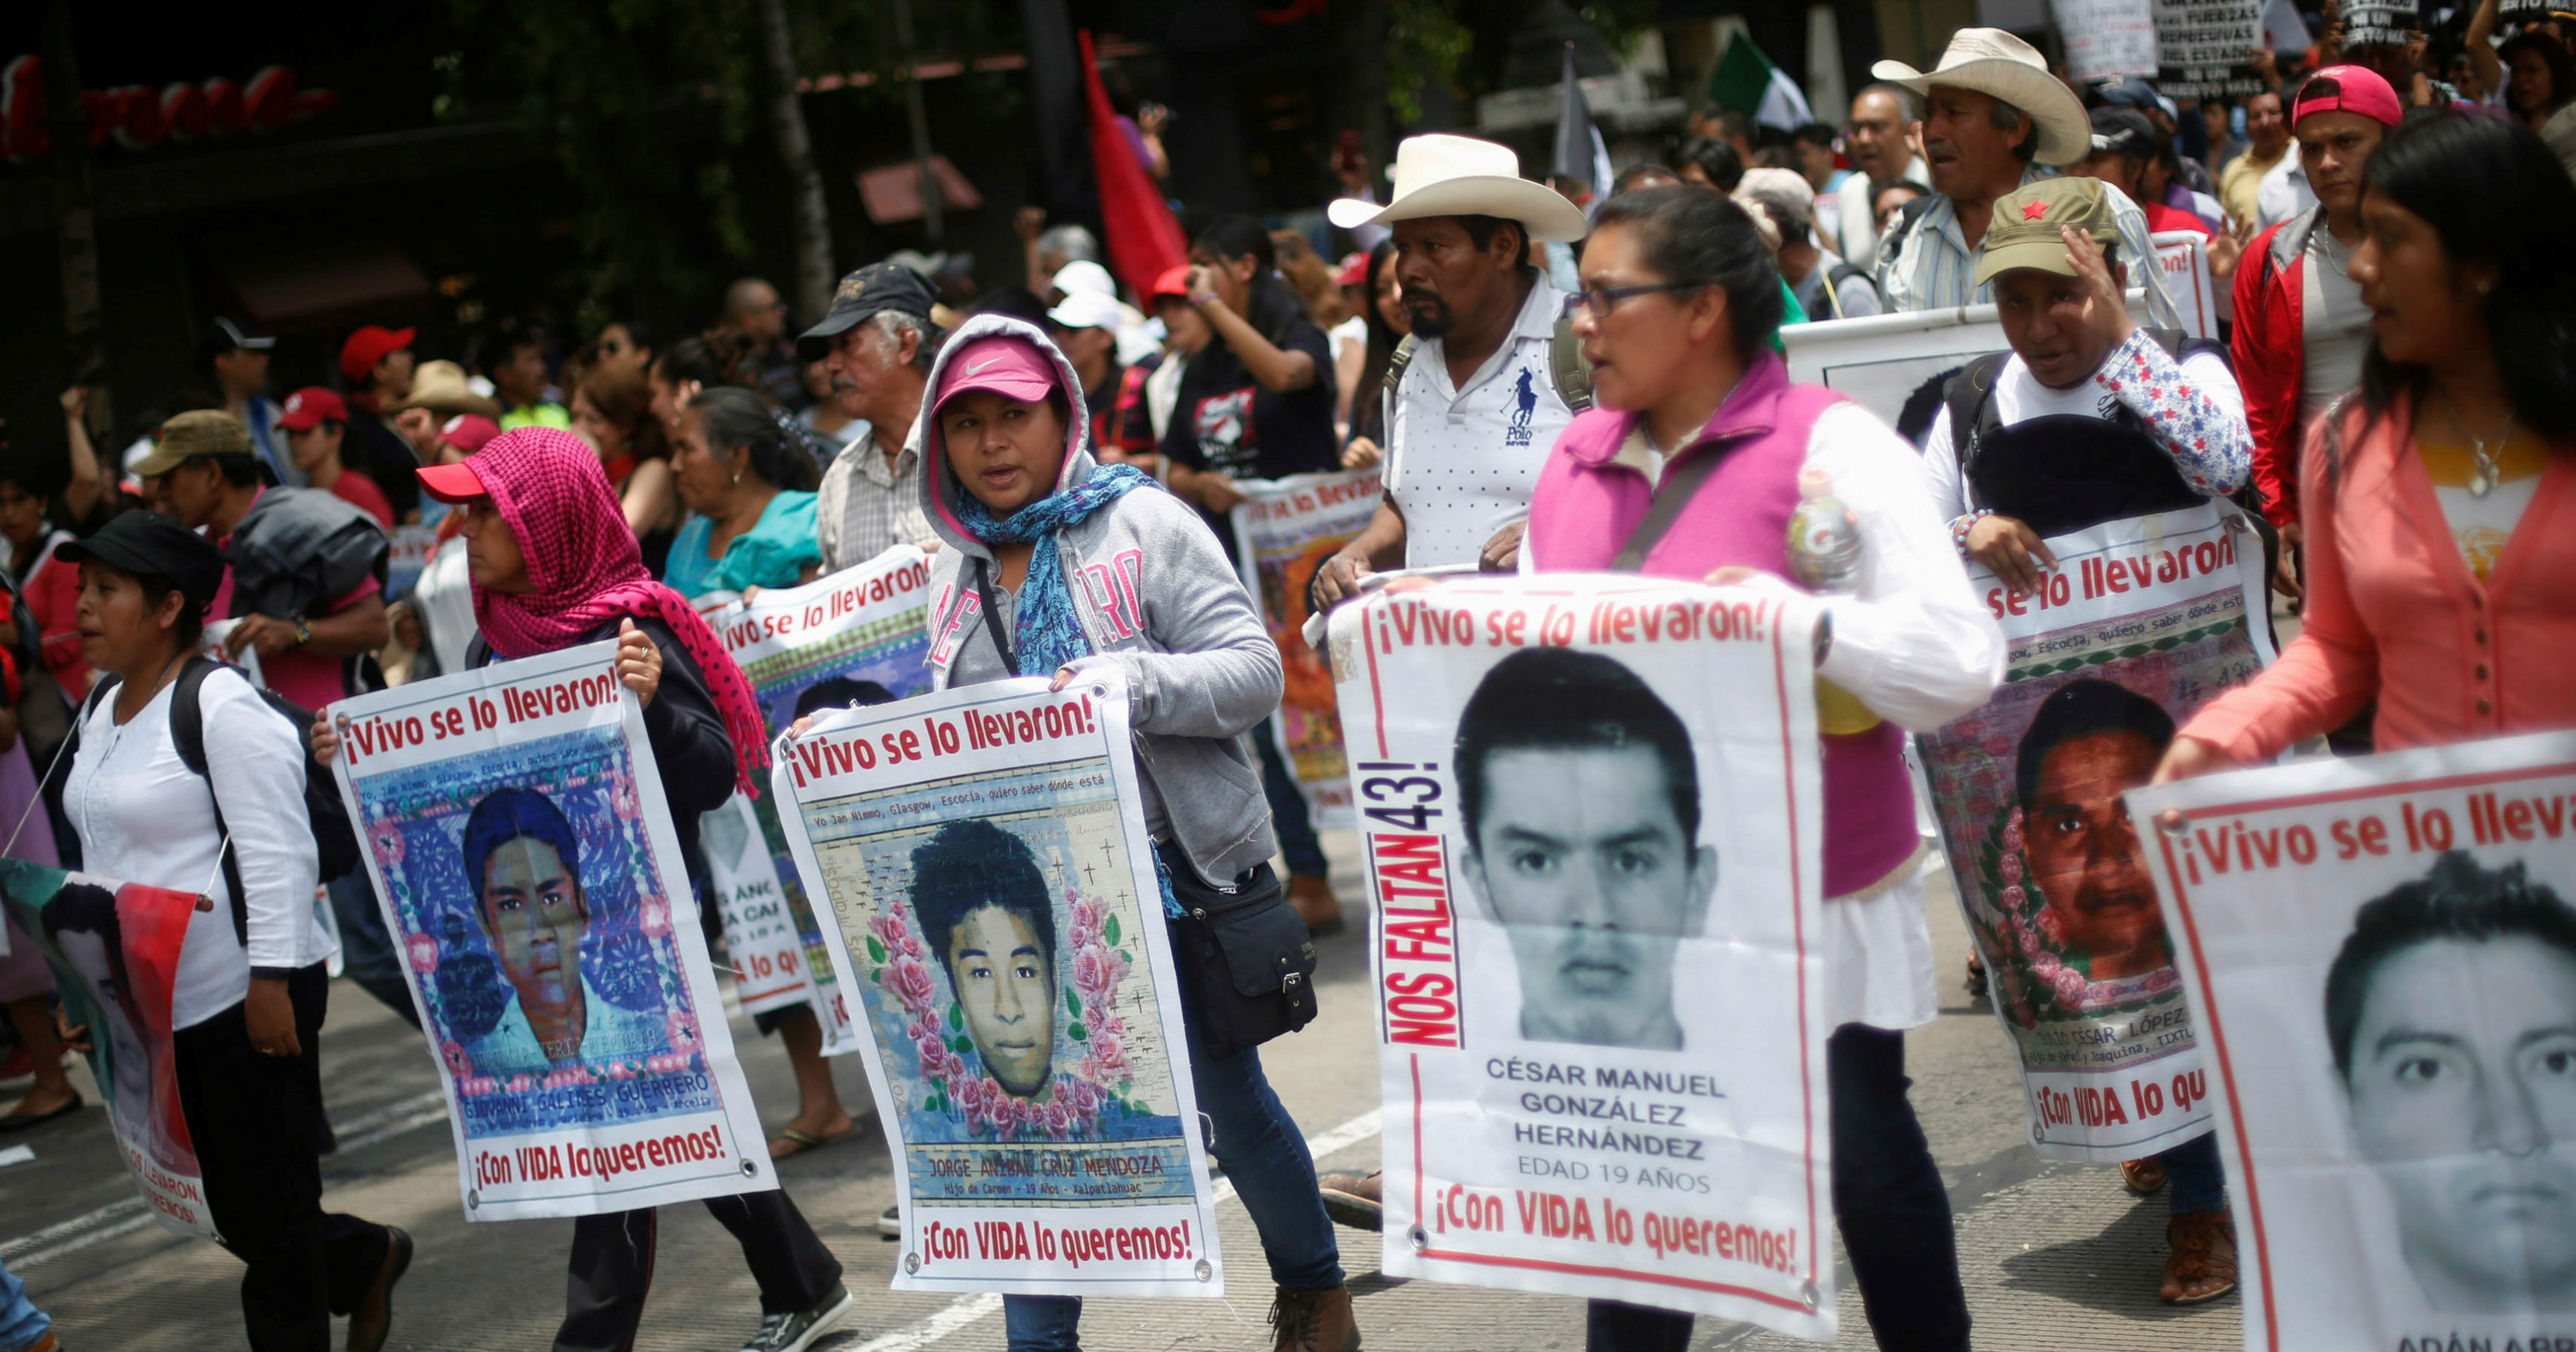 Relatives hold posters with images of some of the 43 missing students as they protest to demand justice for the missing students during a march to mark the 21-month anniversary of their disappearance, in Mexico City, Mexico, June 26, 2016.